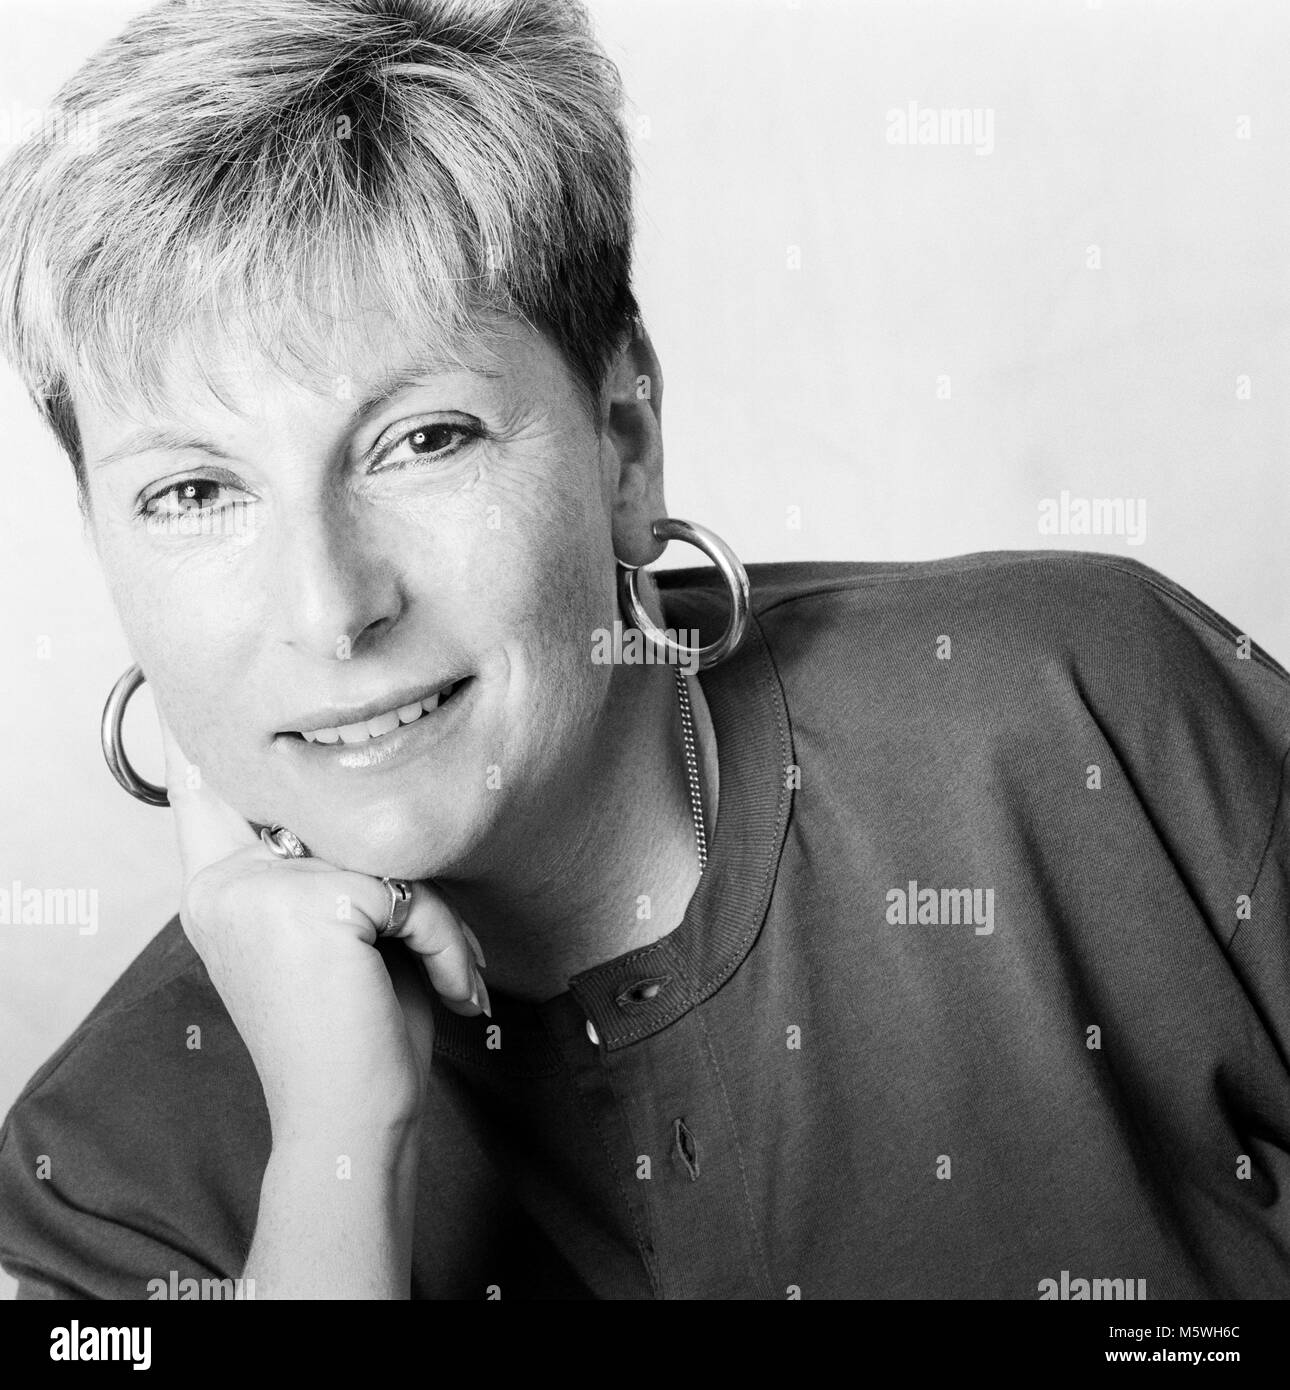 Beth Charkham, casting director, known for work on Charlie and the Chocolate Factory, Death Machine, and The Passion of Darkly Noon, Archival photograph made on 31 July 1991 Stock Photo